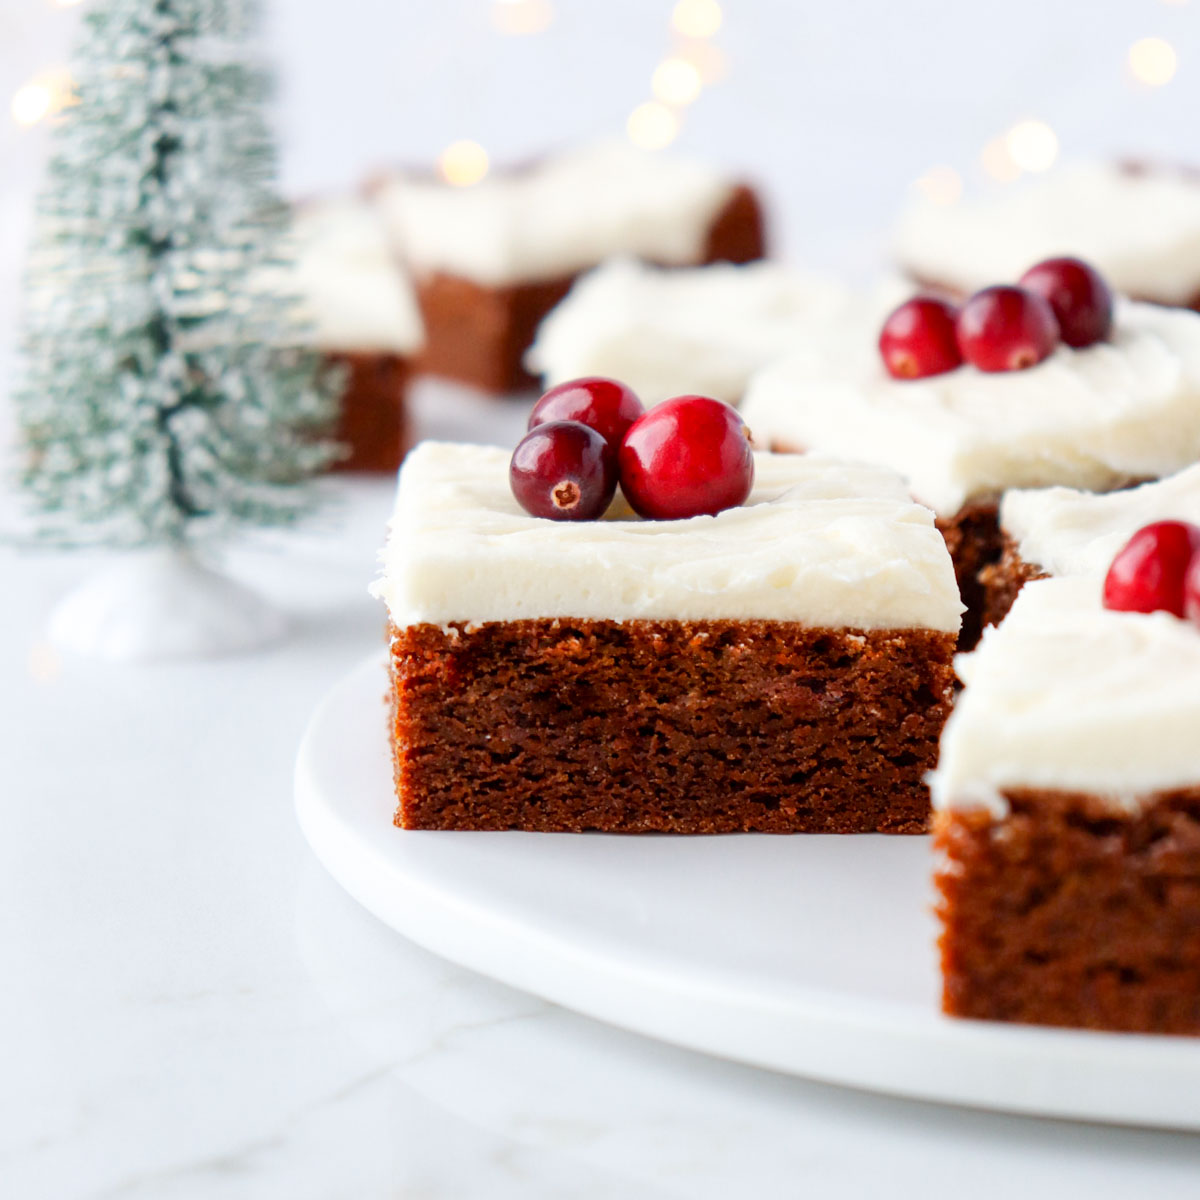 Ginger molasses cookie bar topped with cream cheese frosting and fresh cranberries as a garnish.